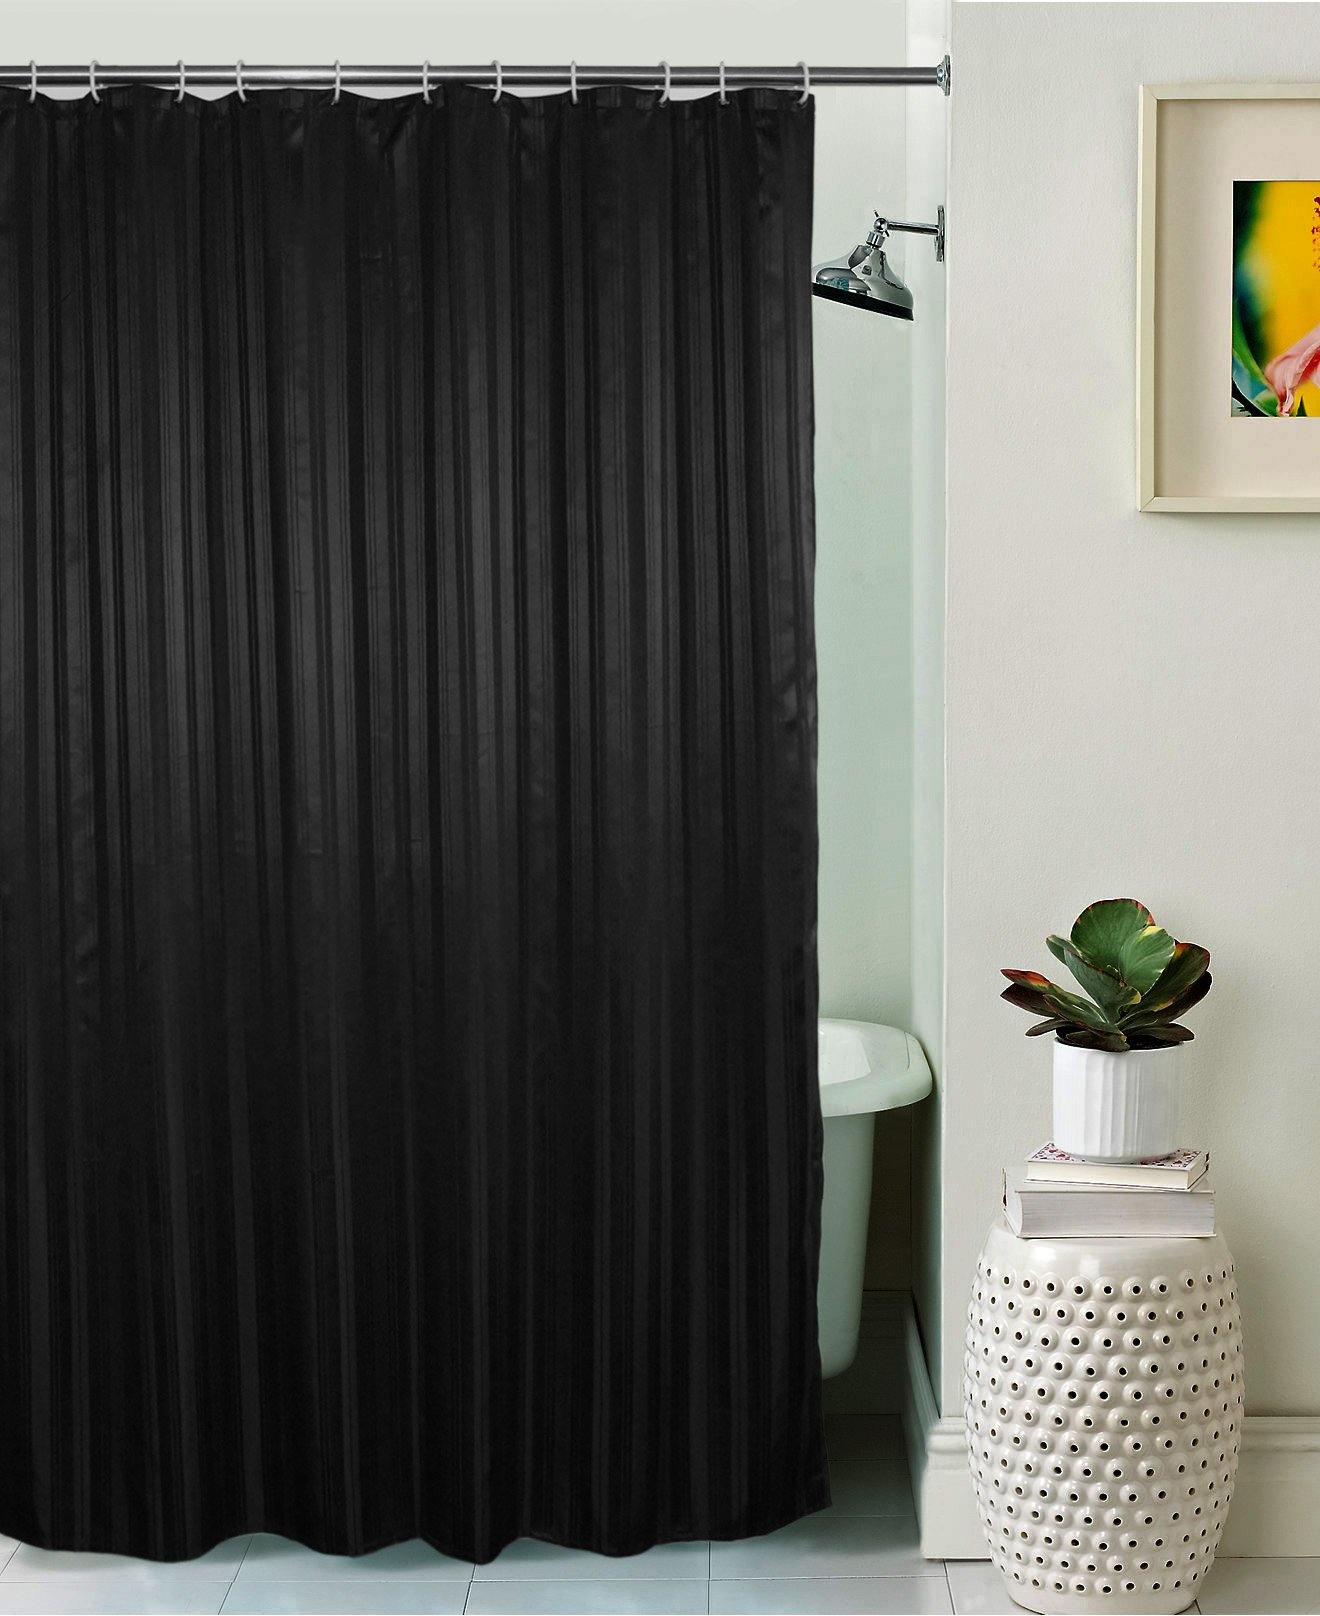 Lushomes Black Thick Stripe Waterproof Bathroom Shower Curtain with 12 Eyelets and 12 C-hooks - Lushomes